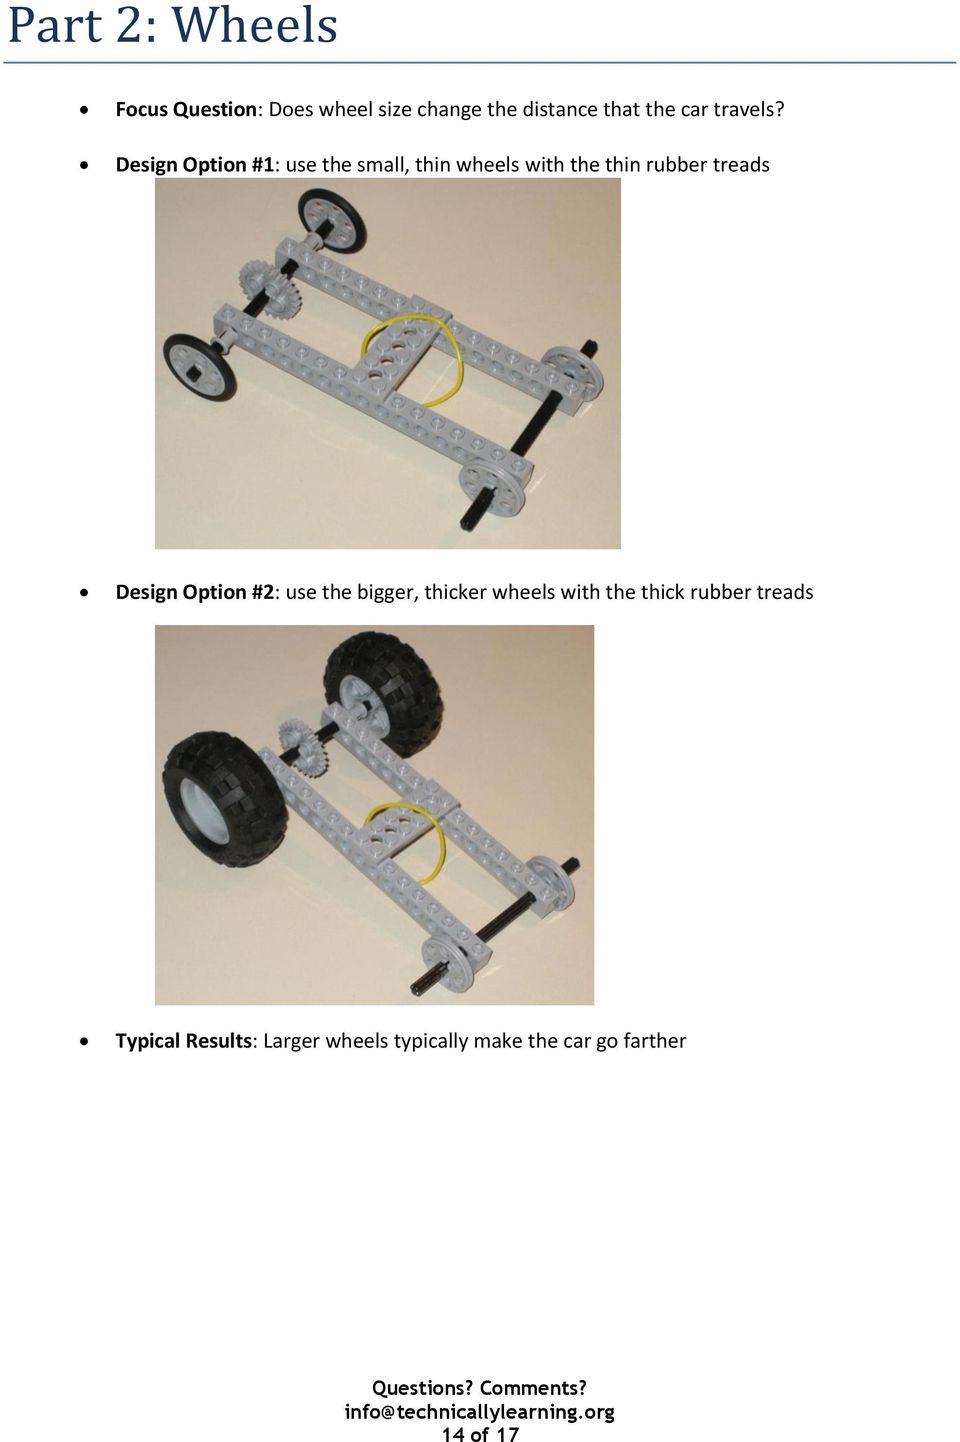 Design Option #1: use the small, thin wheels with the thin rubber treads